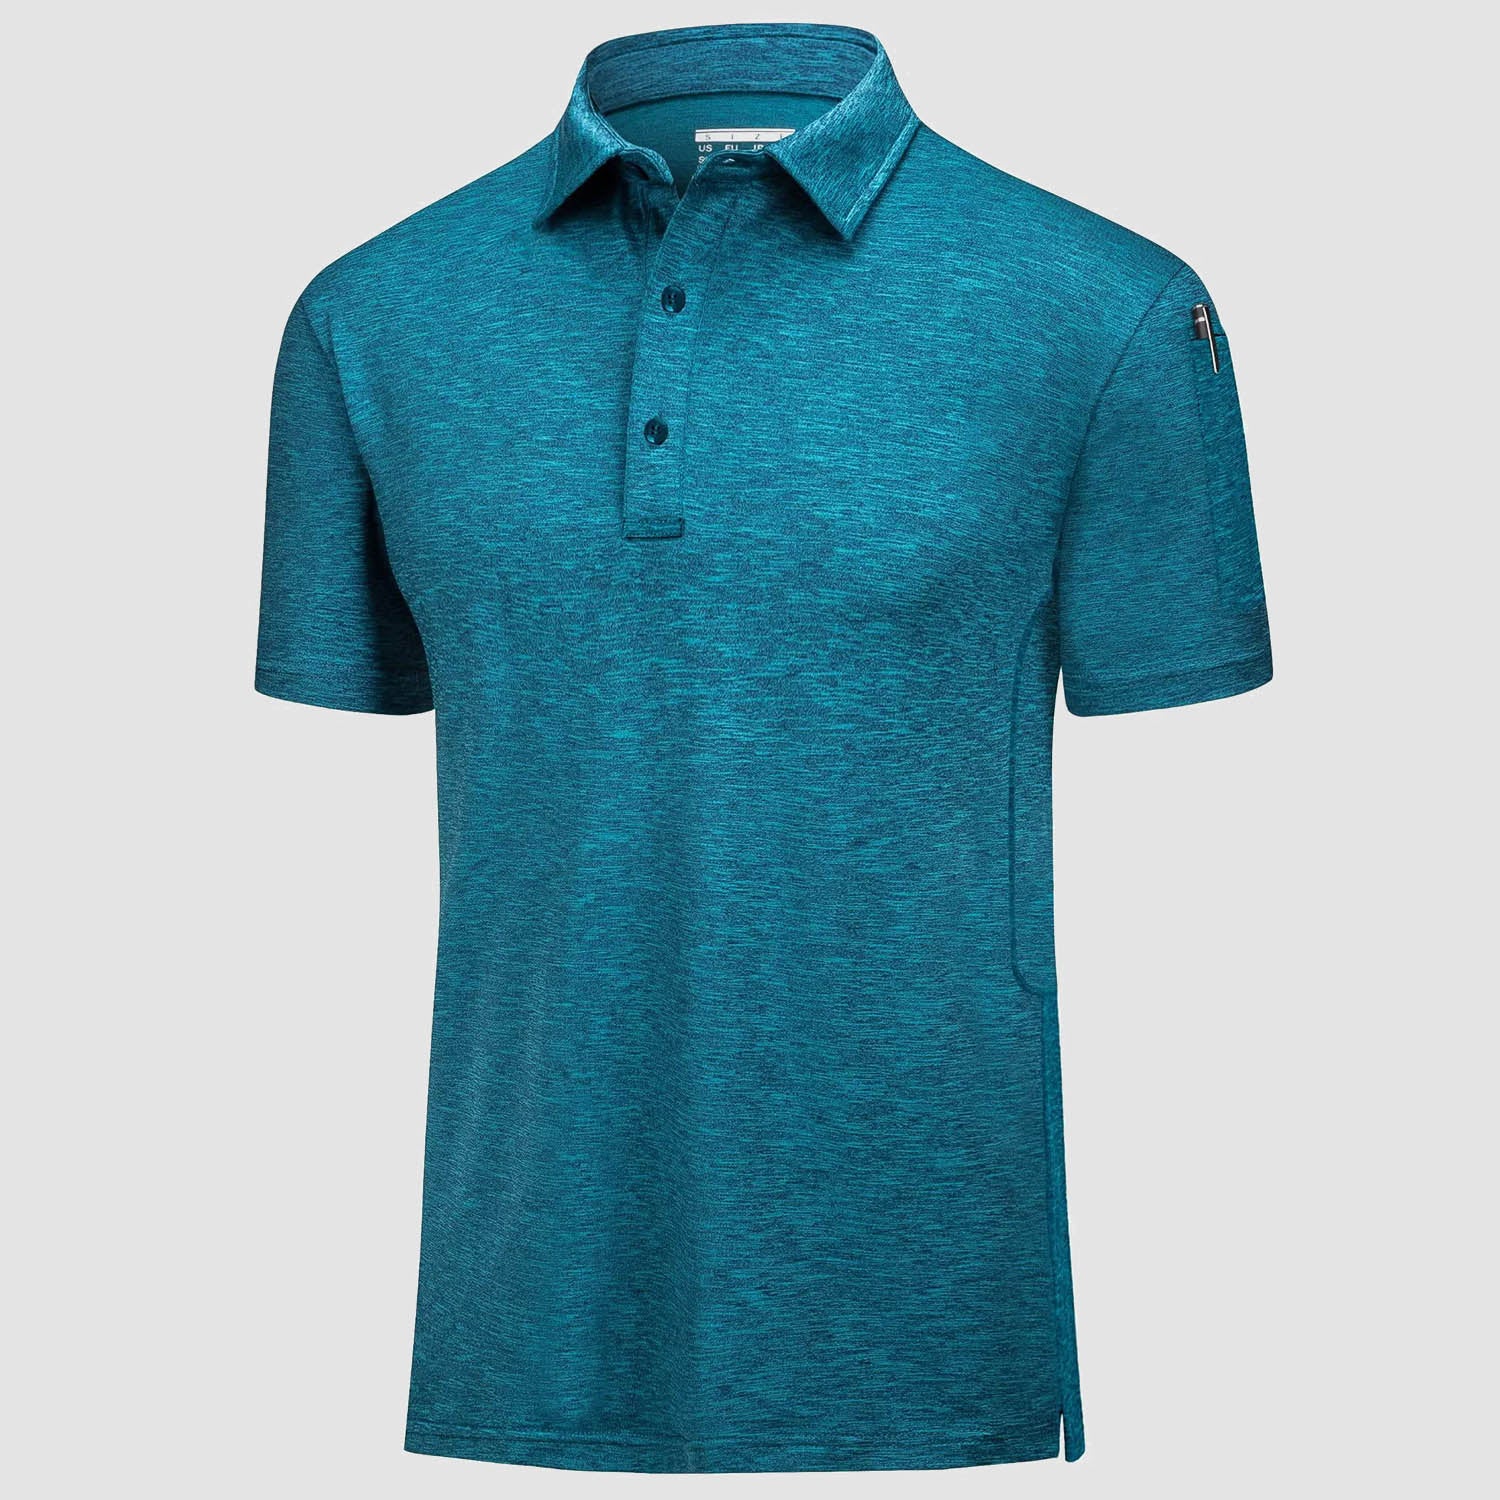 Men's Jersey Breathable Polo T-shirt Quick Dry Performance Golf Sports